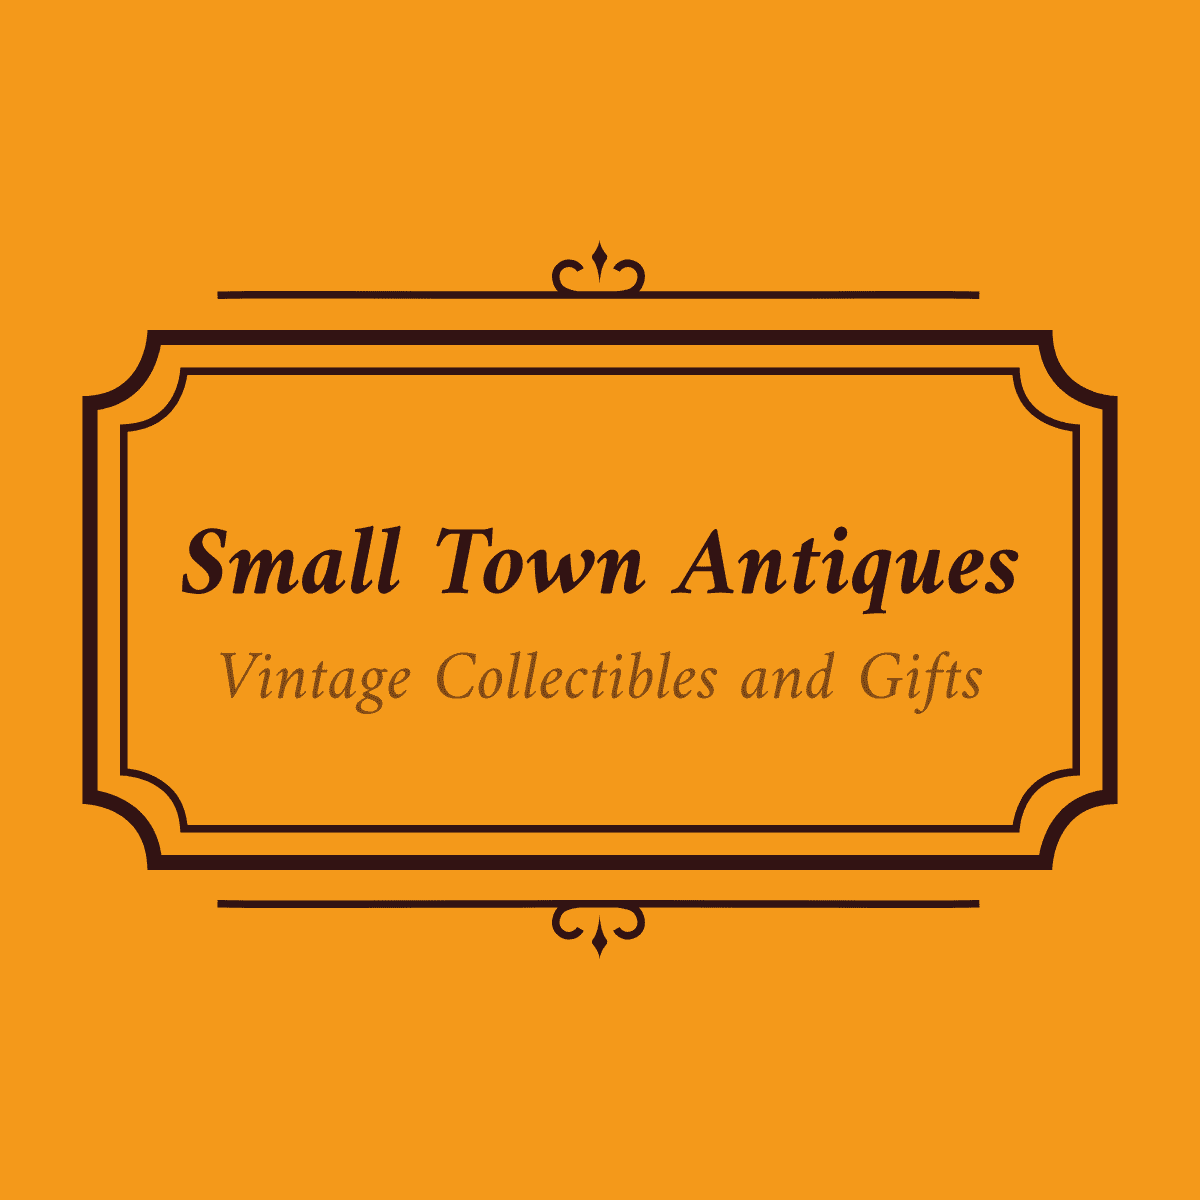 Small Town Antiques